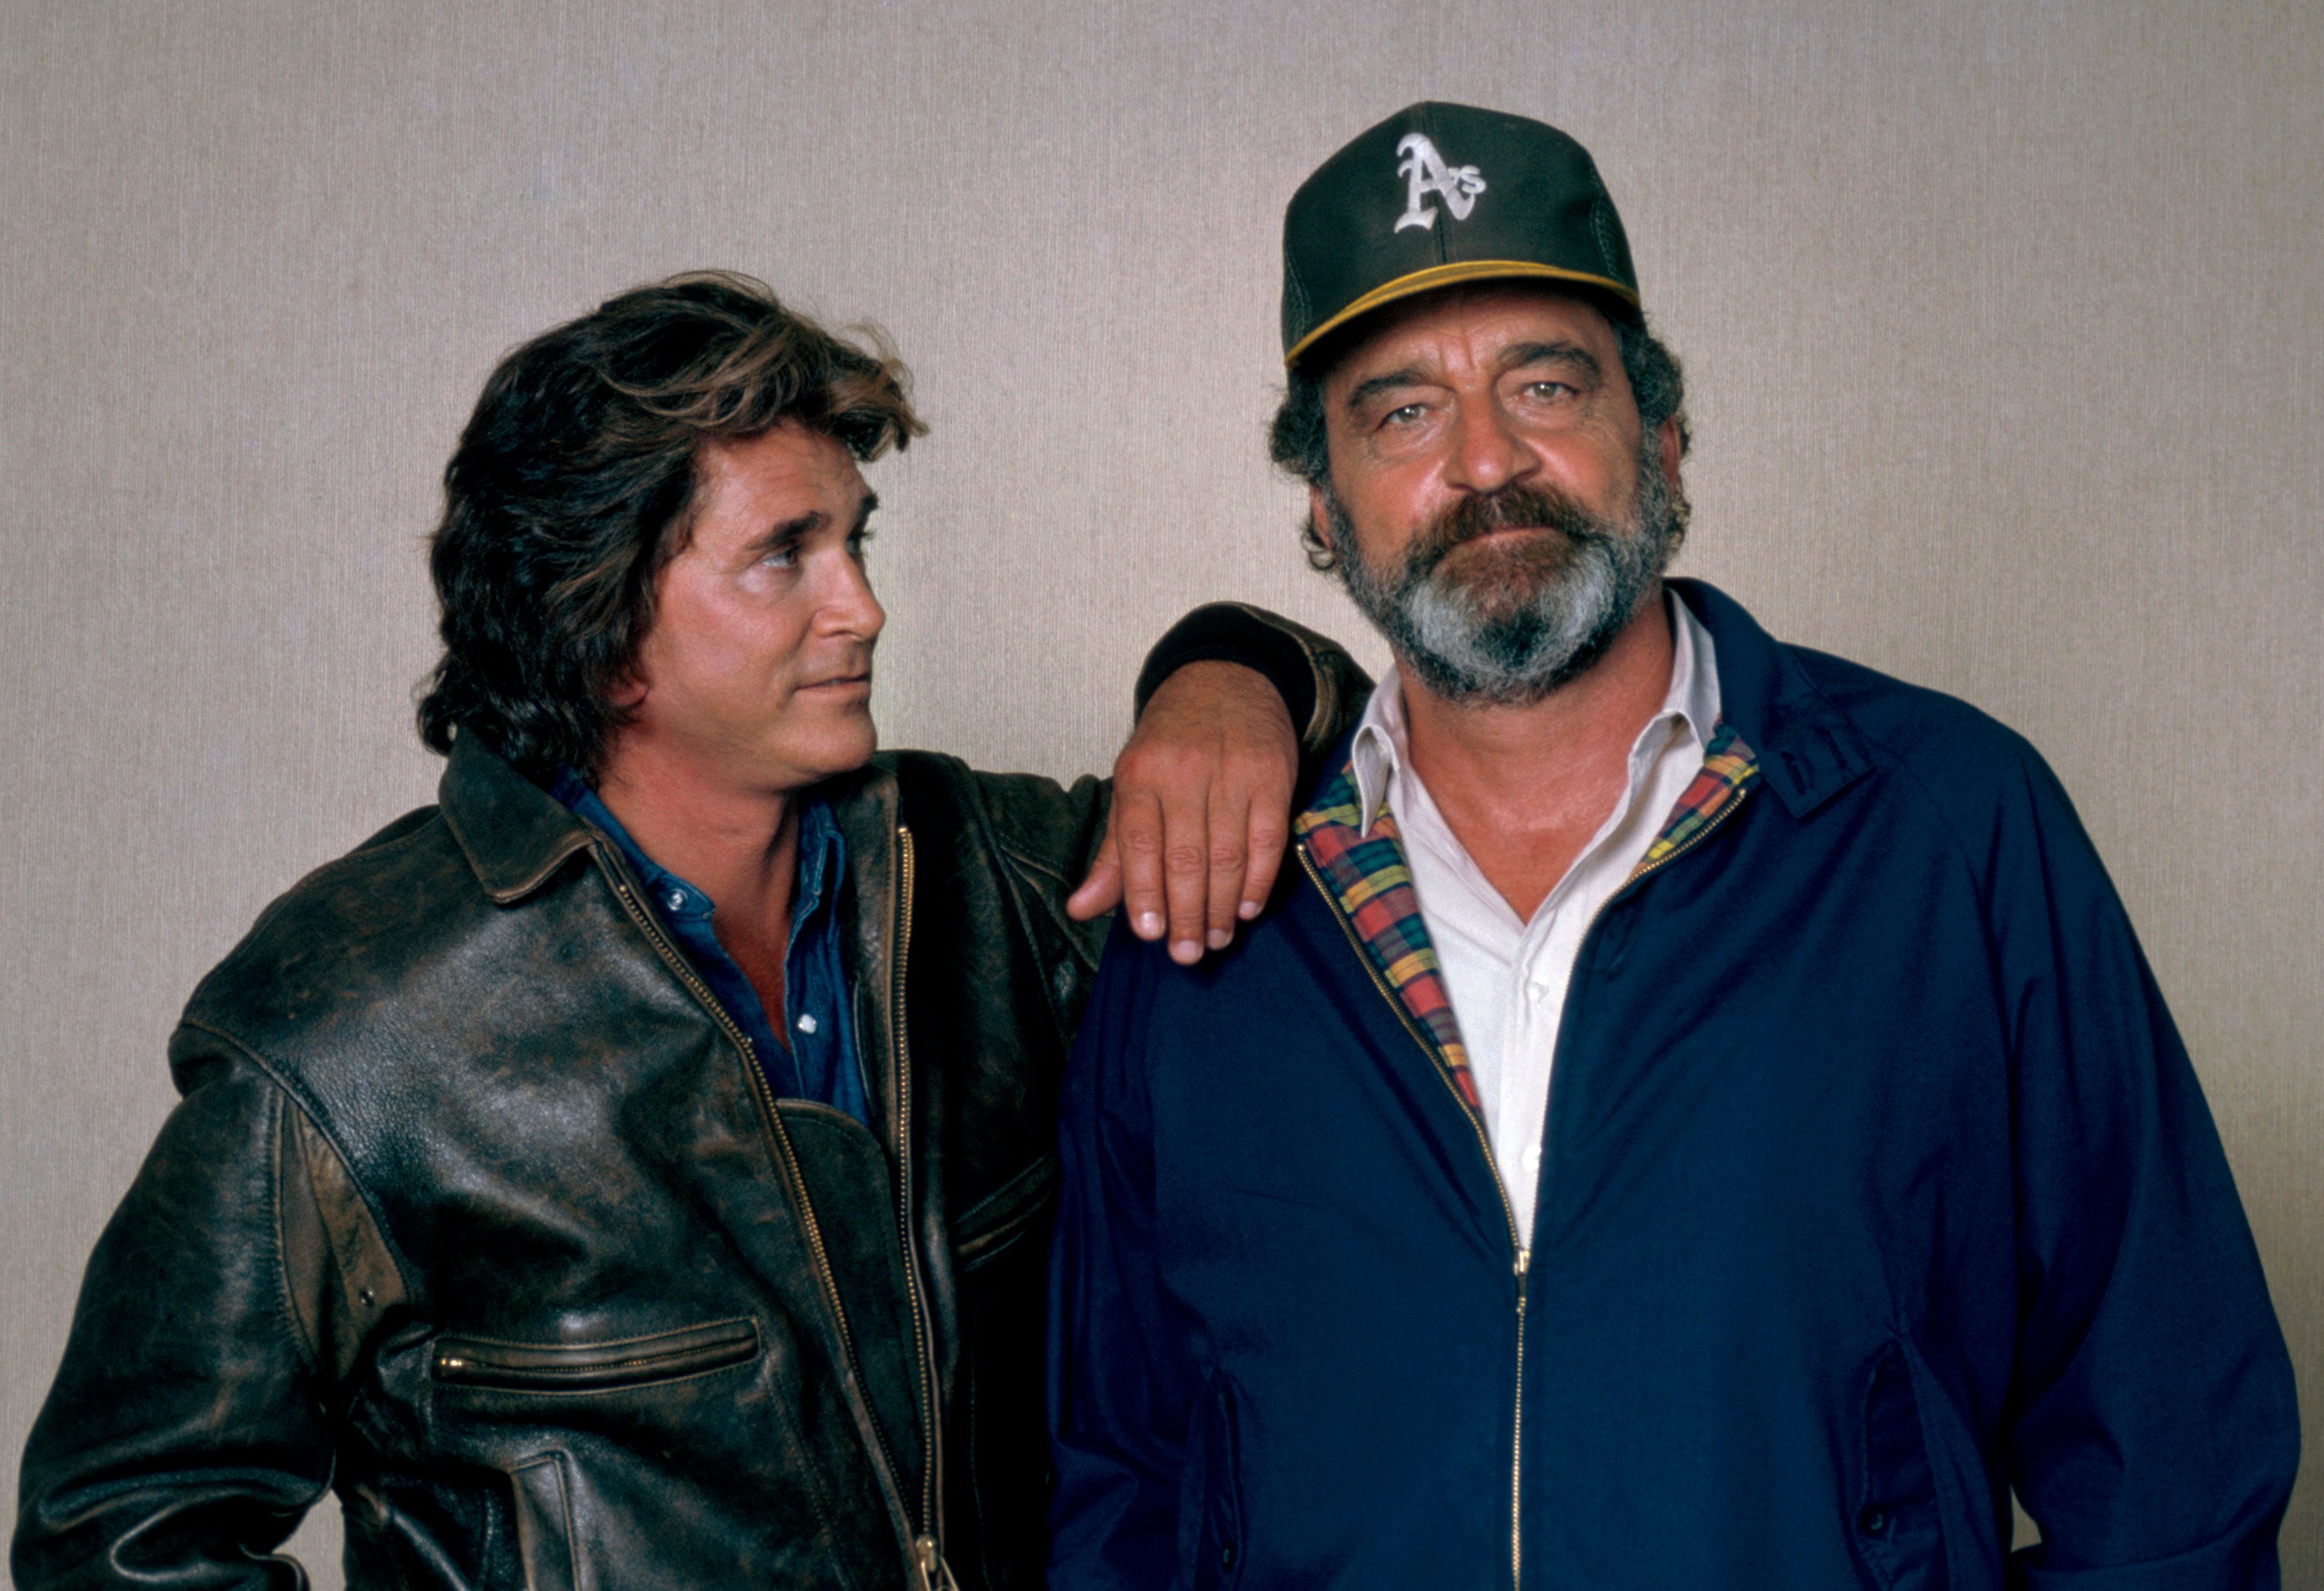 Michael Landon as Jonathan Smith and Victor French as Mark Gordon |  Frank Carroll/NBCU Photo Bank/NBCUniversal via Getty Images  